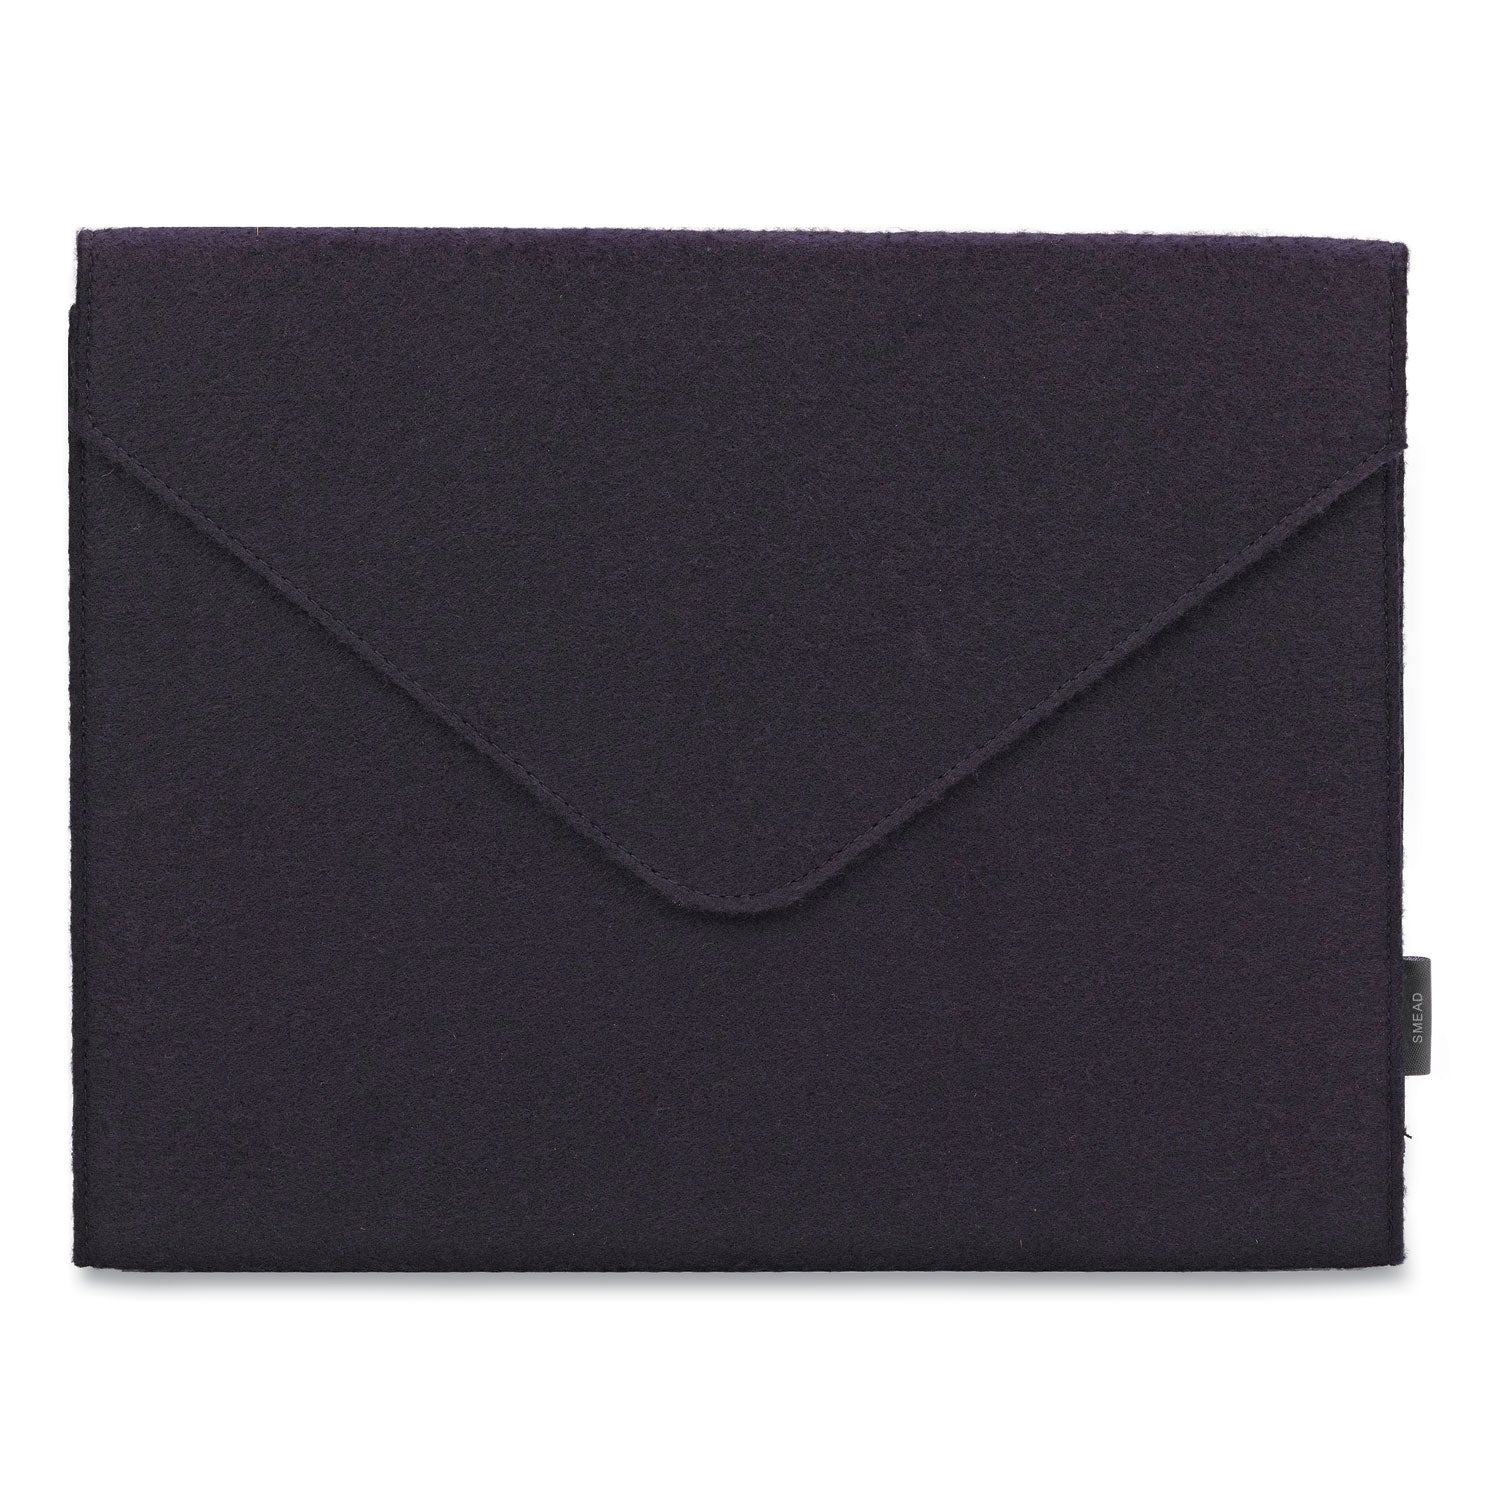 soft-touch-cloth-expanding-files-2-expansion-1-section-snap-closure-letter-size-dark-blue_smd70922 - 4